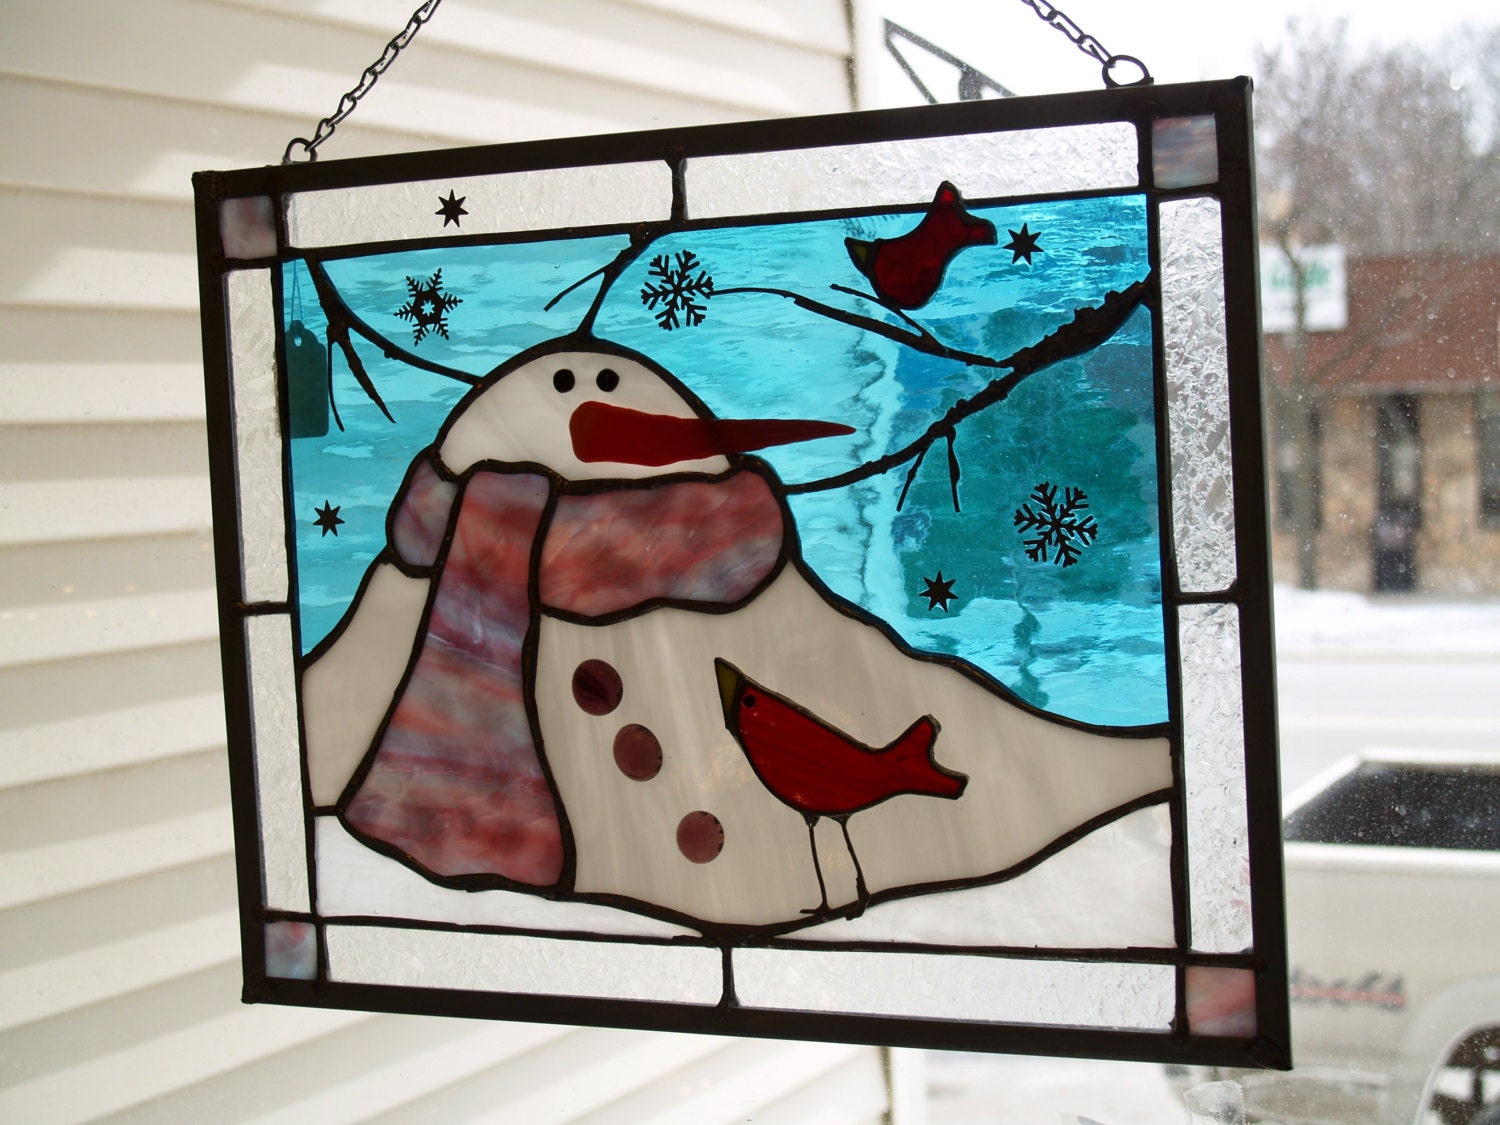 Melting Snowman Stained Glass Panel Window By Stainedglassbyjenn